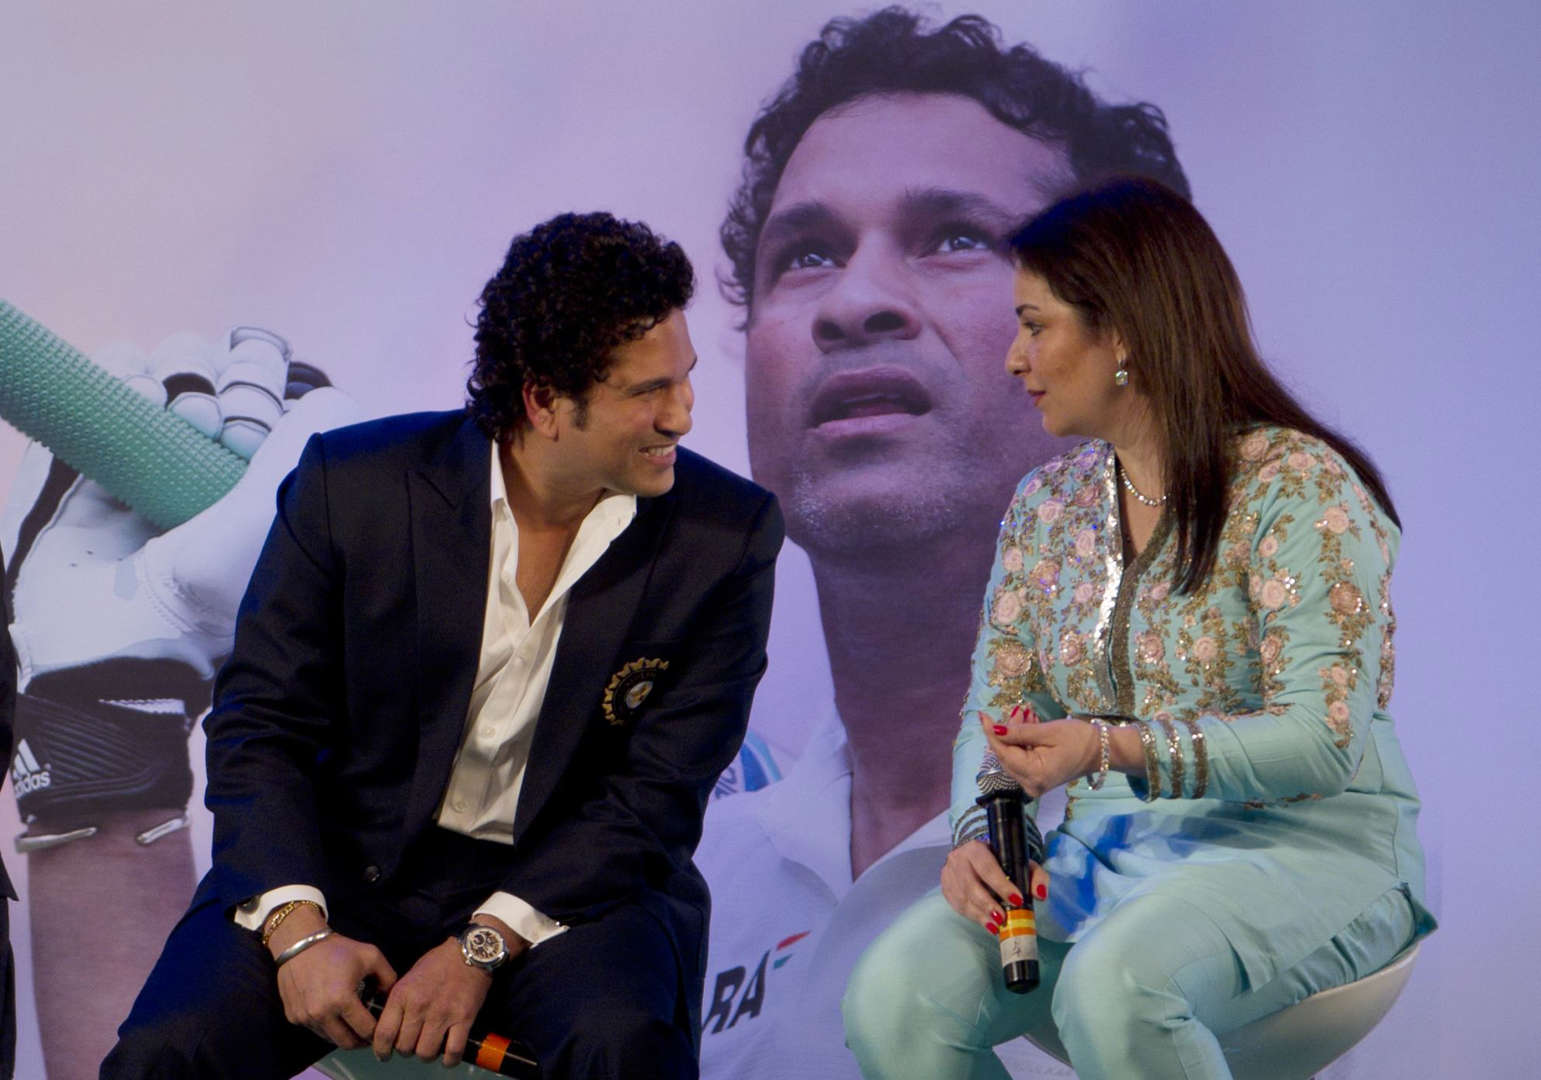 Slide 2 of 13: Indian Cricket legend Sachin Tendulkar with wife Anjali Tendulkar during the release of his autobiography 'Playing It My Way' on November 5, 2014 in Mumbai, India.